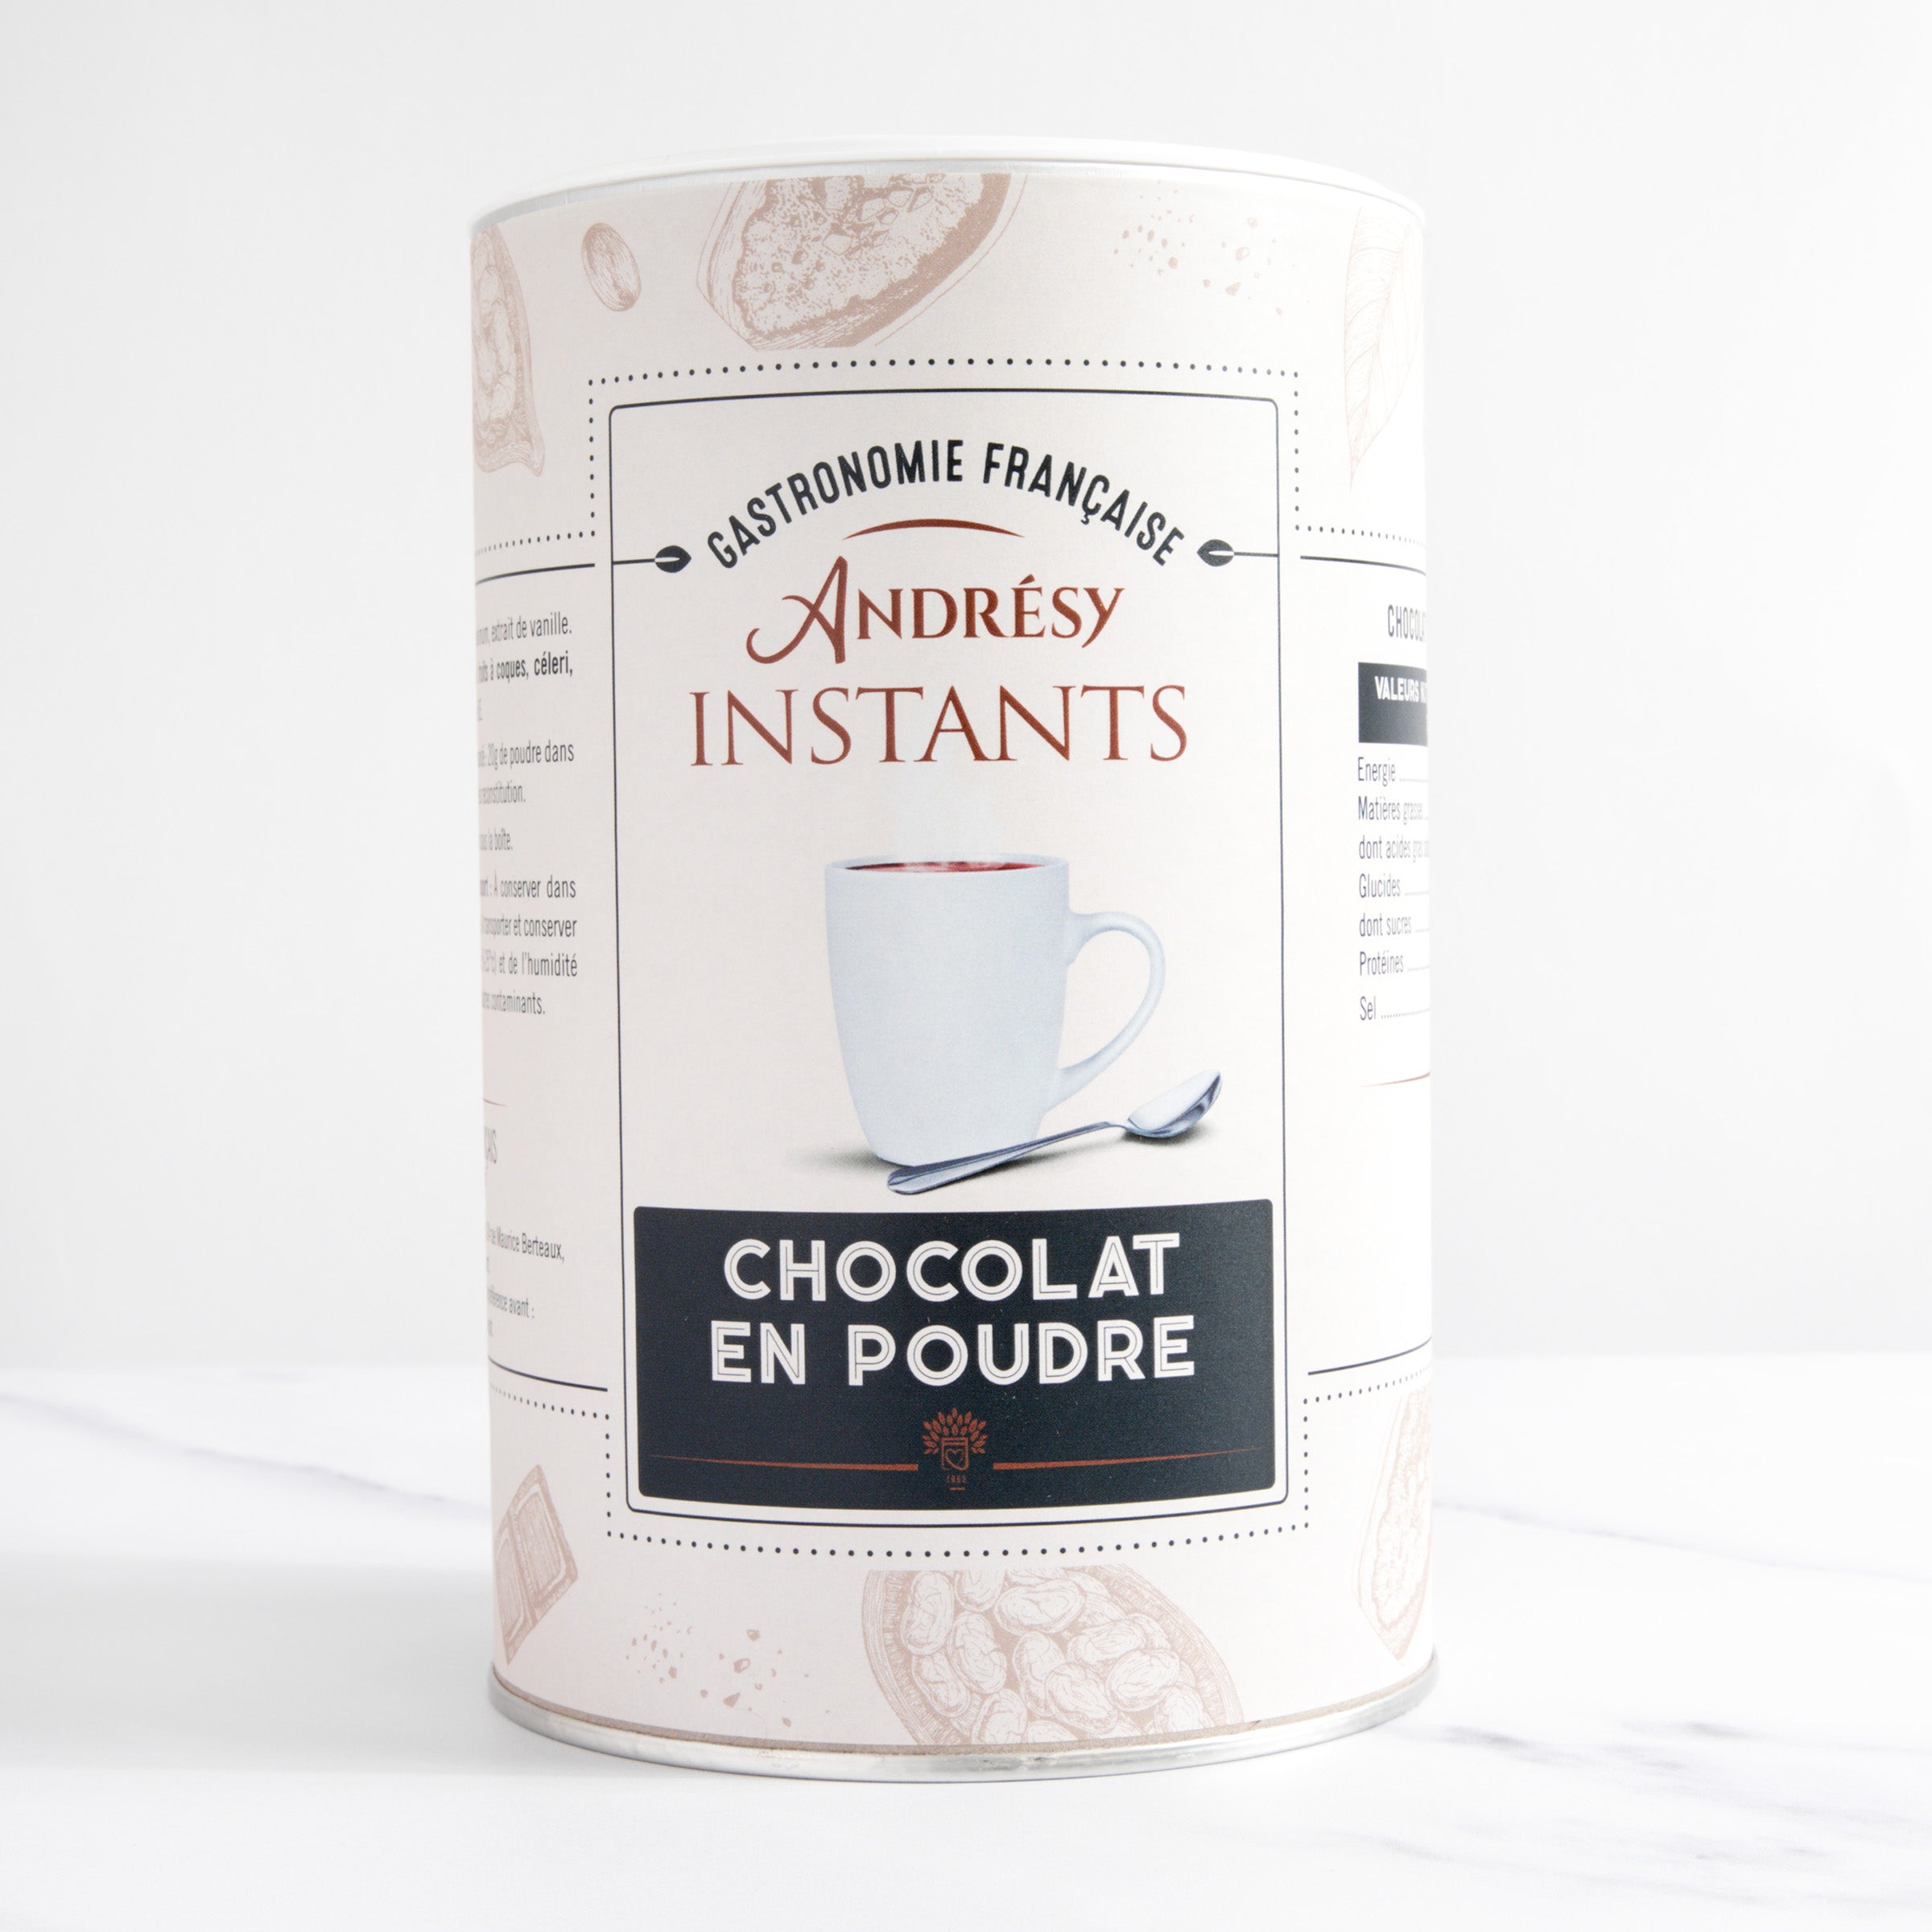 igourmet_8957_Andresy Instants_French Powdered Chocolate Canister_Coffee, Tea & Hot Chocolate